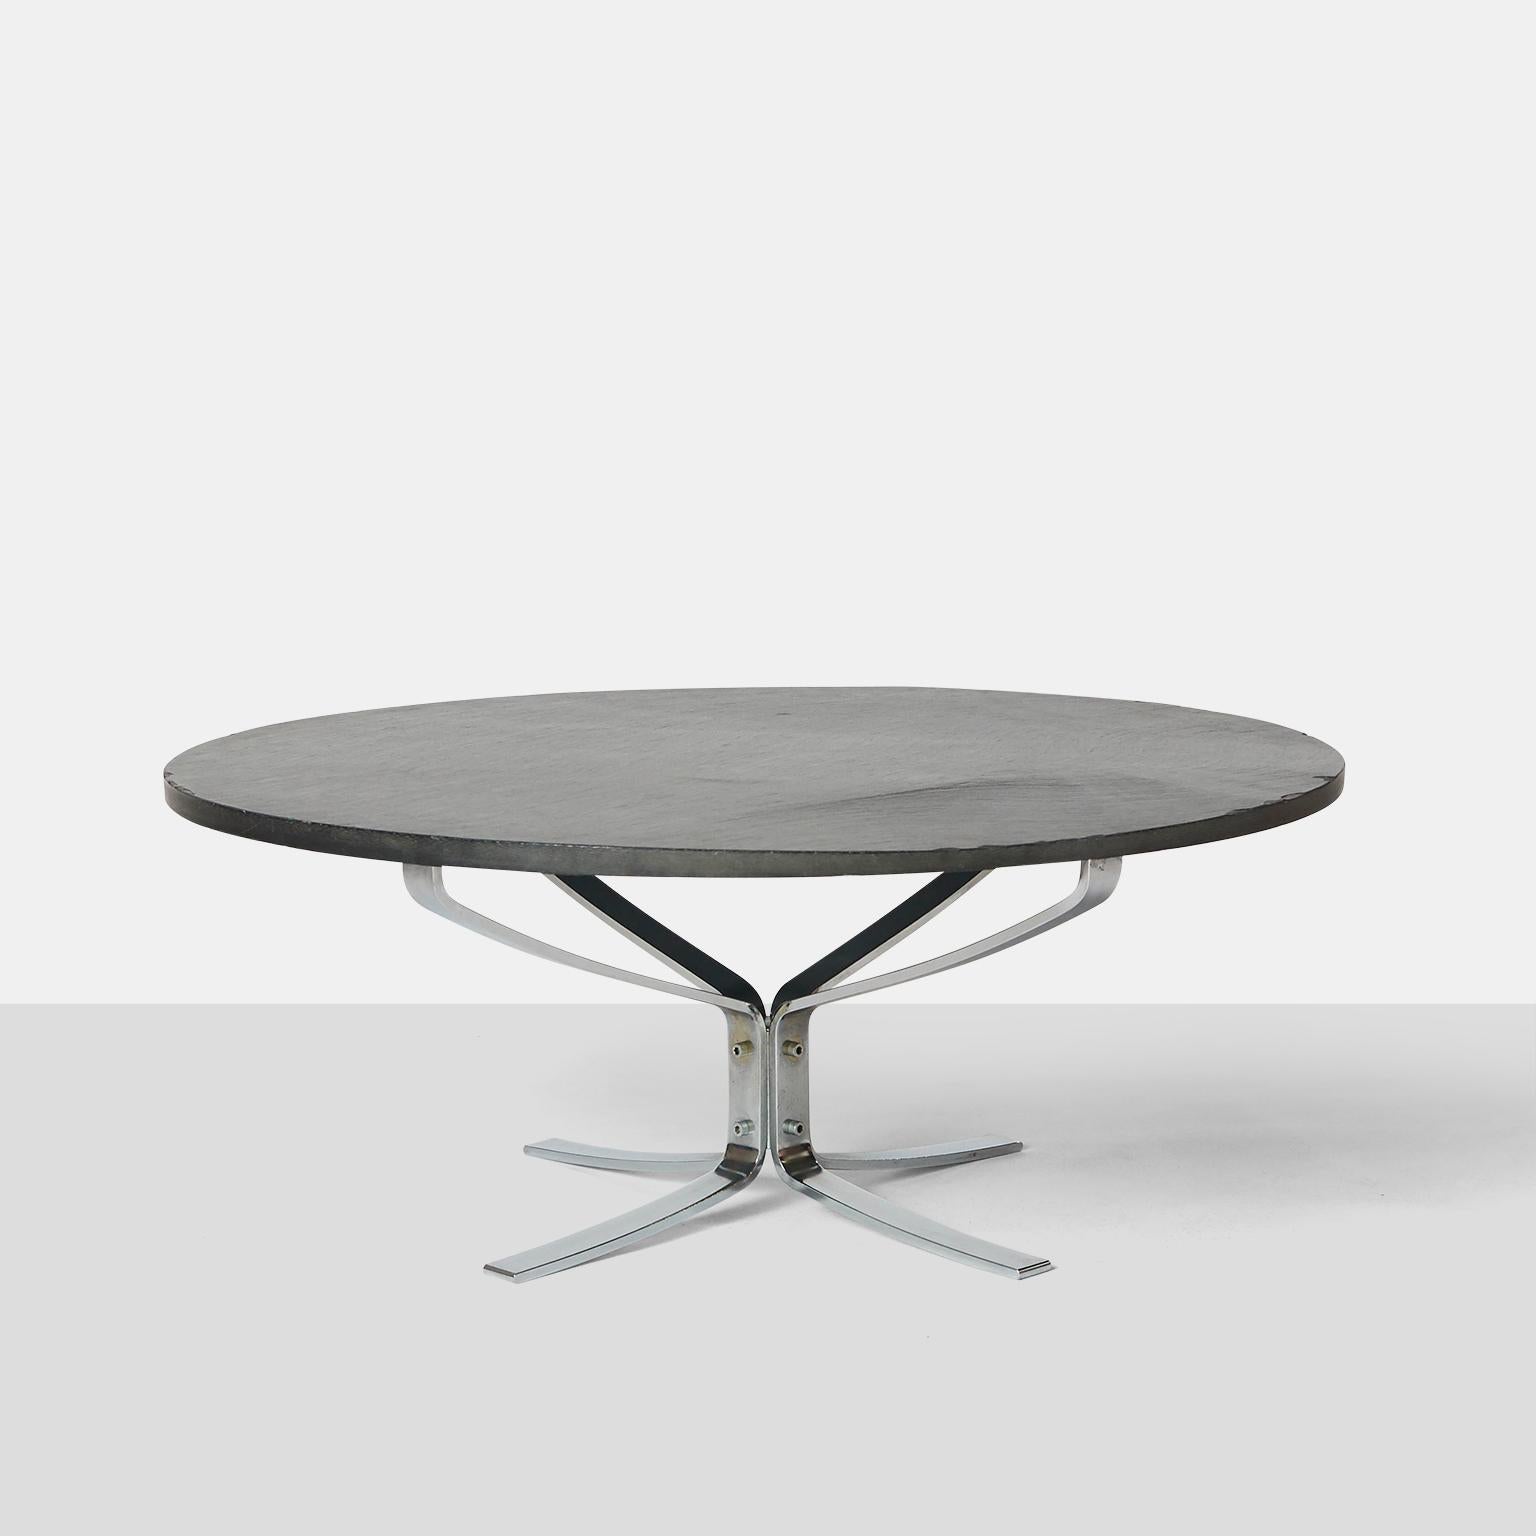 A chrome and slate Falcon series coffee table designed by Sigurd Ressell. Designed c.1961 for Vatne Mobler.